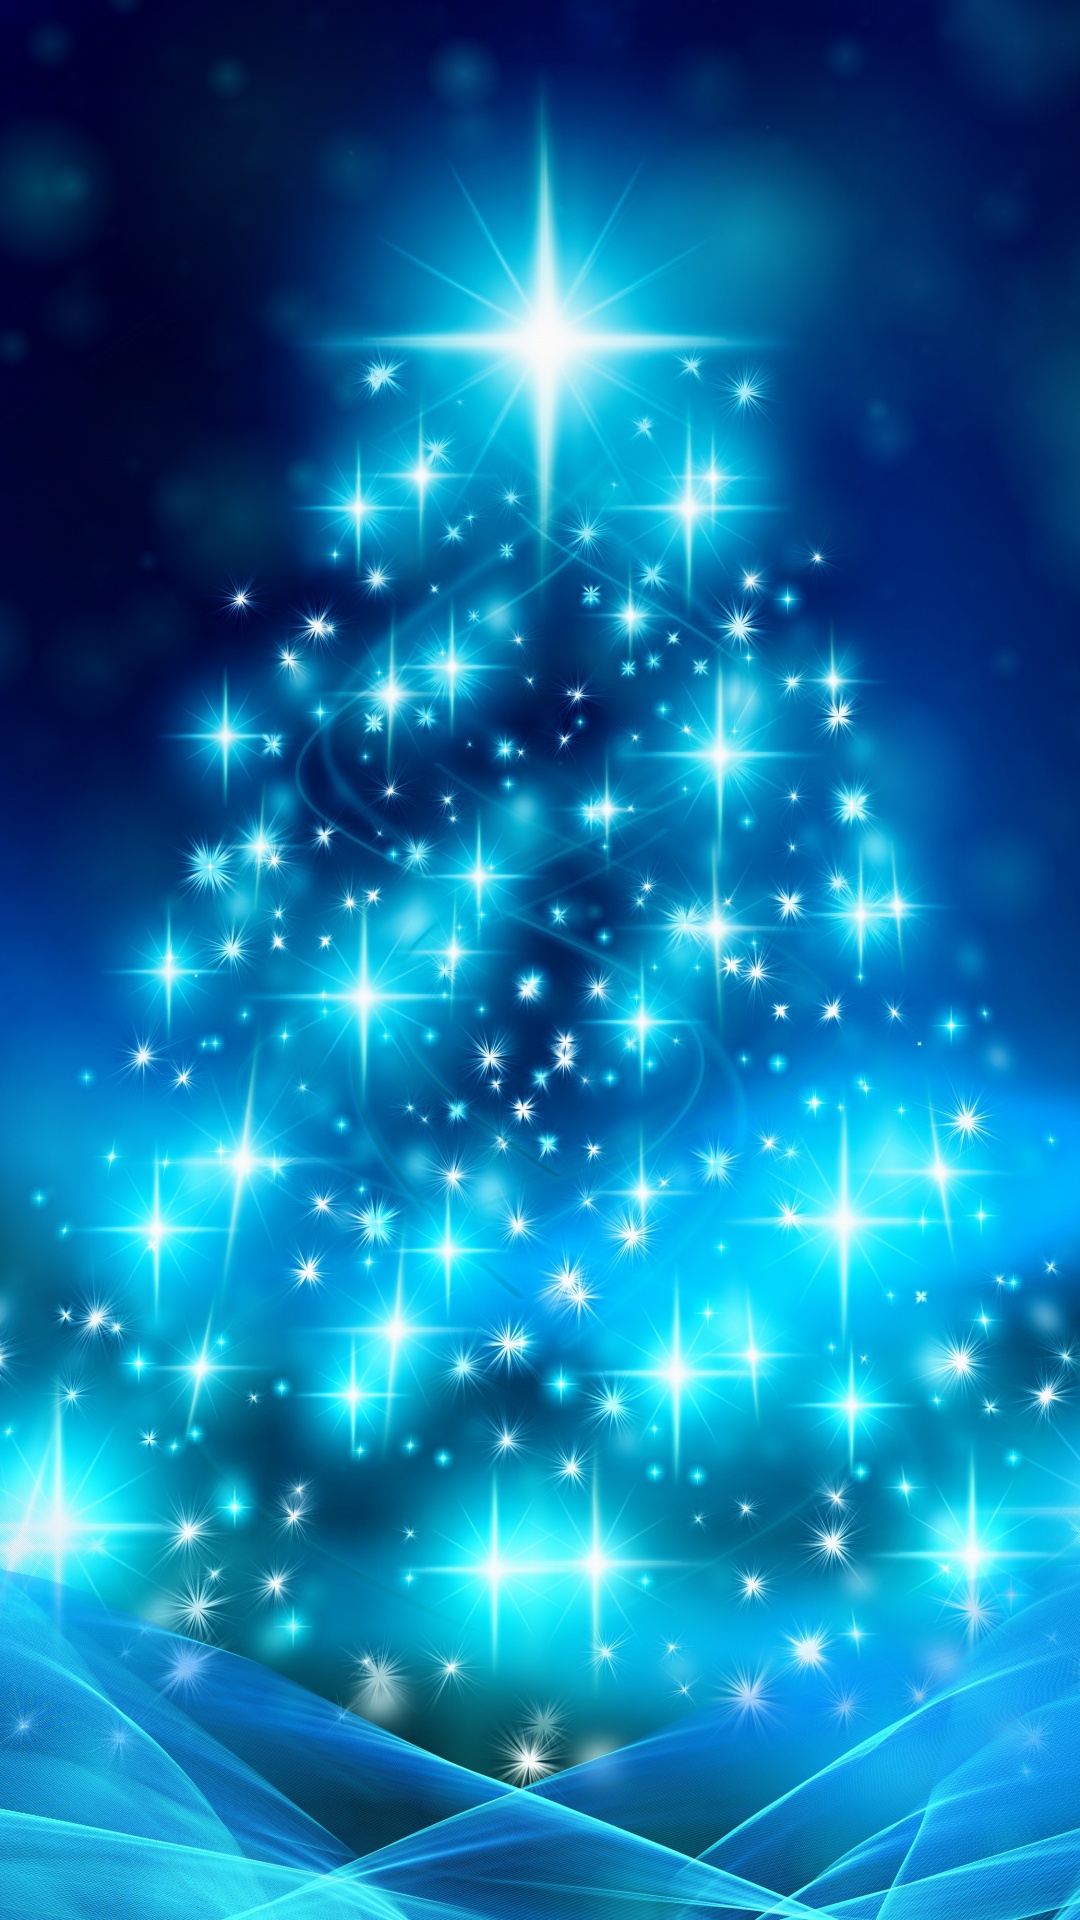 Christmas Day, Christmas Tree, Christmas Decoration, Blue, Tree. Wallpaper in 1080x1920 Resolution